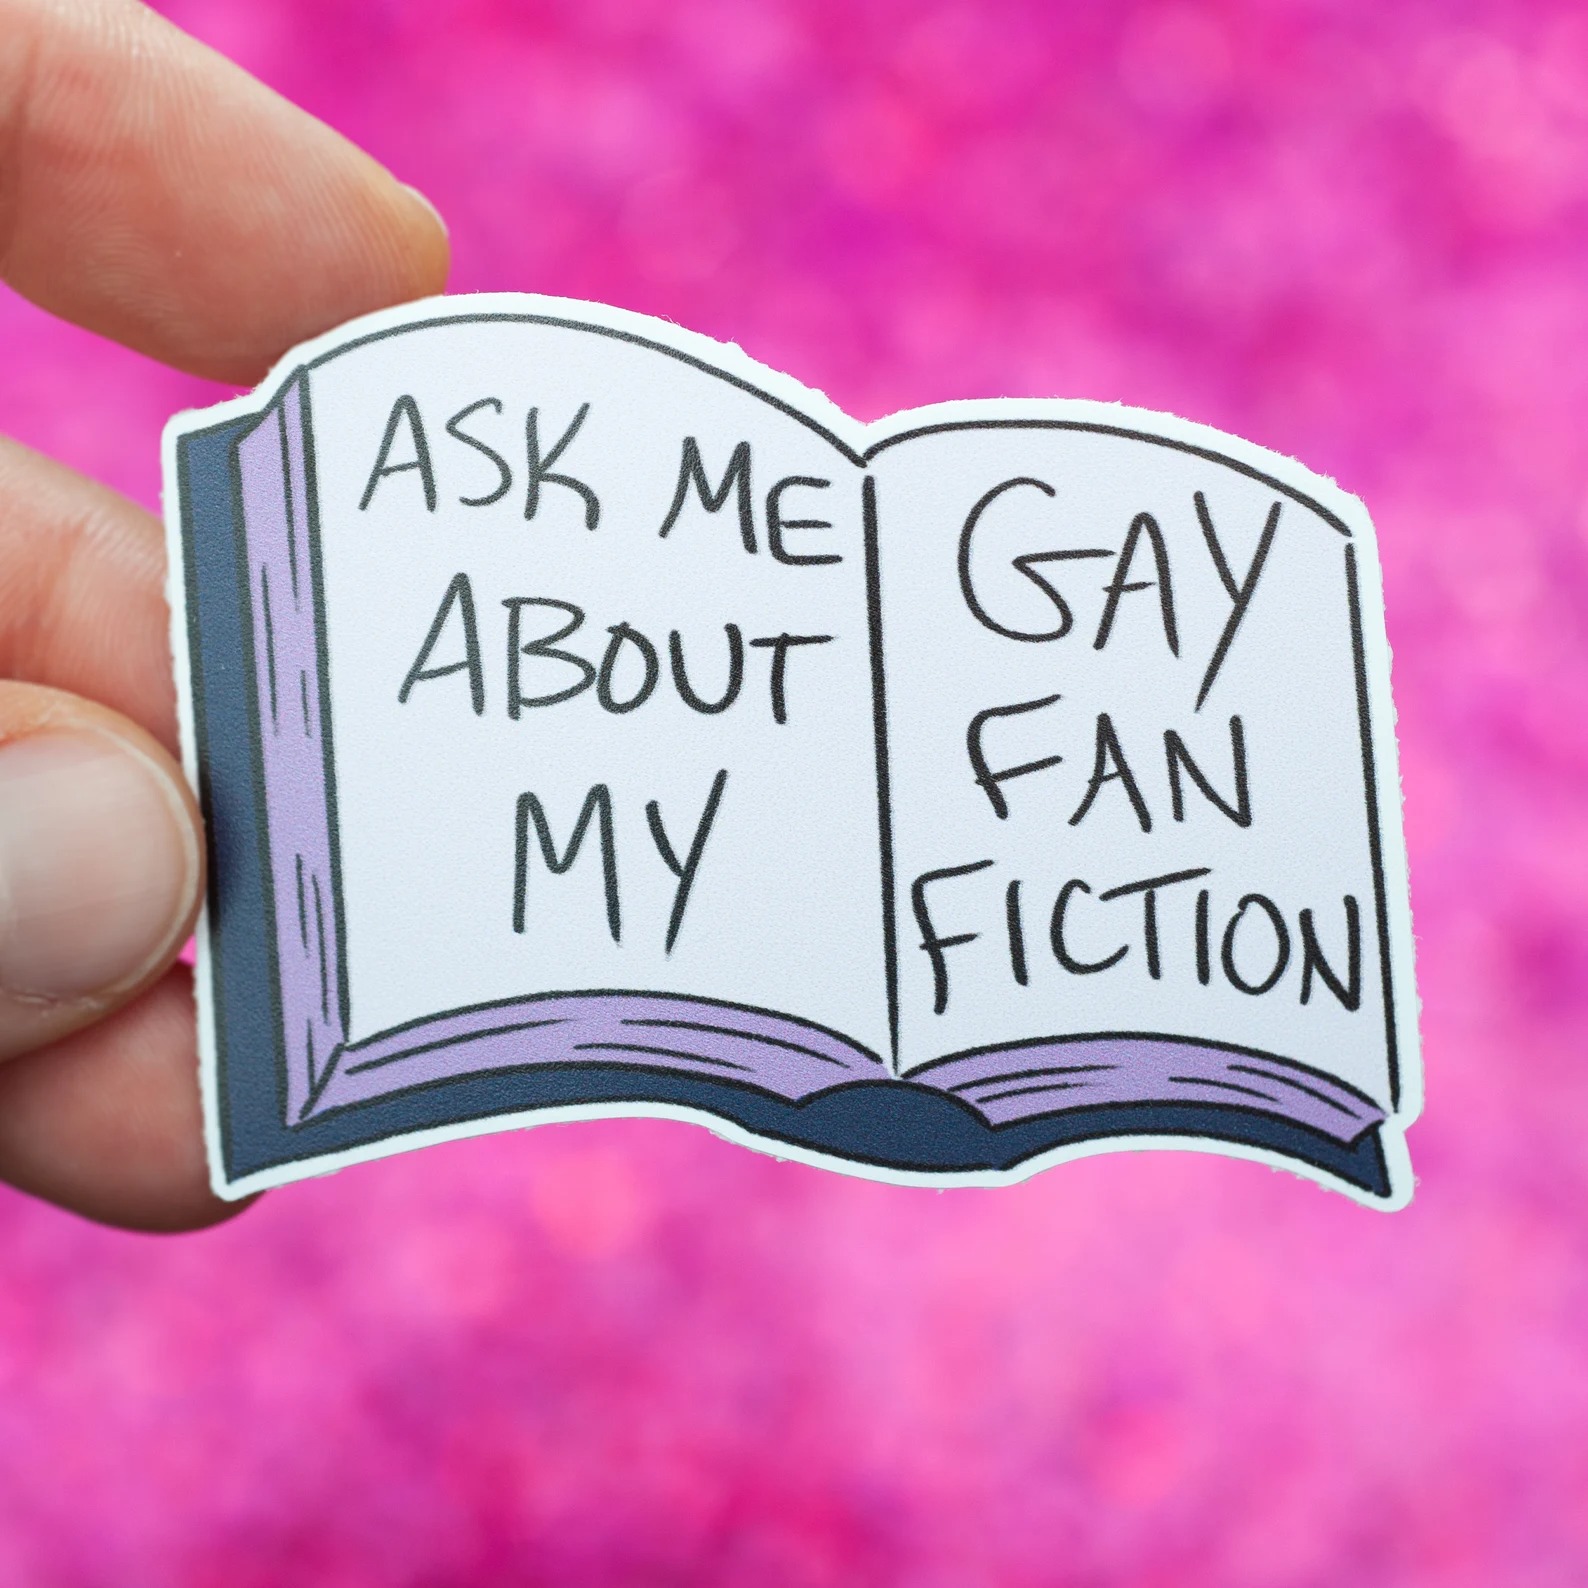 a sticker of an open book with the text "Ask me about my gay fanfiction"